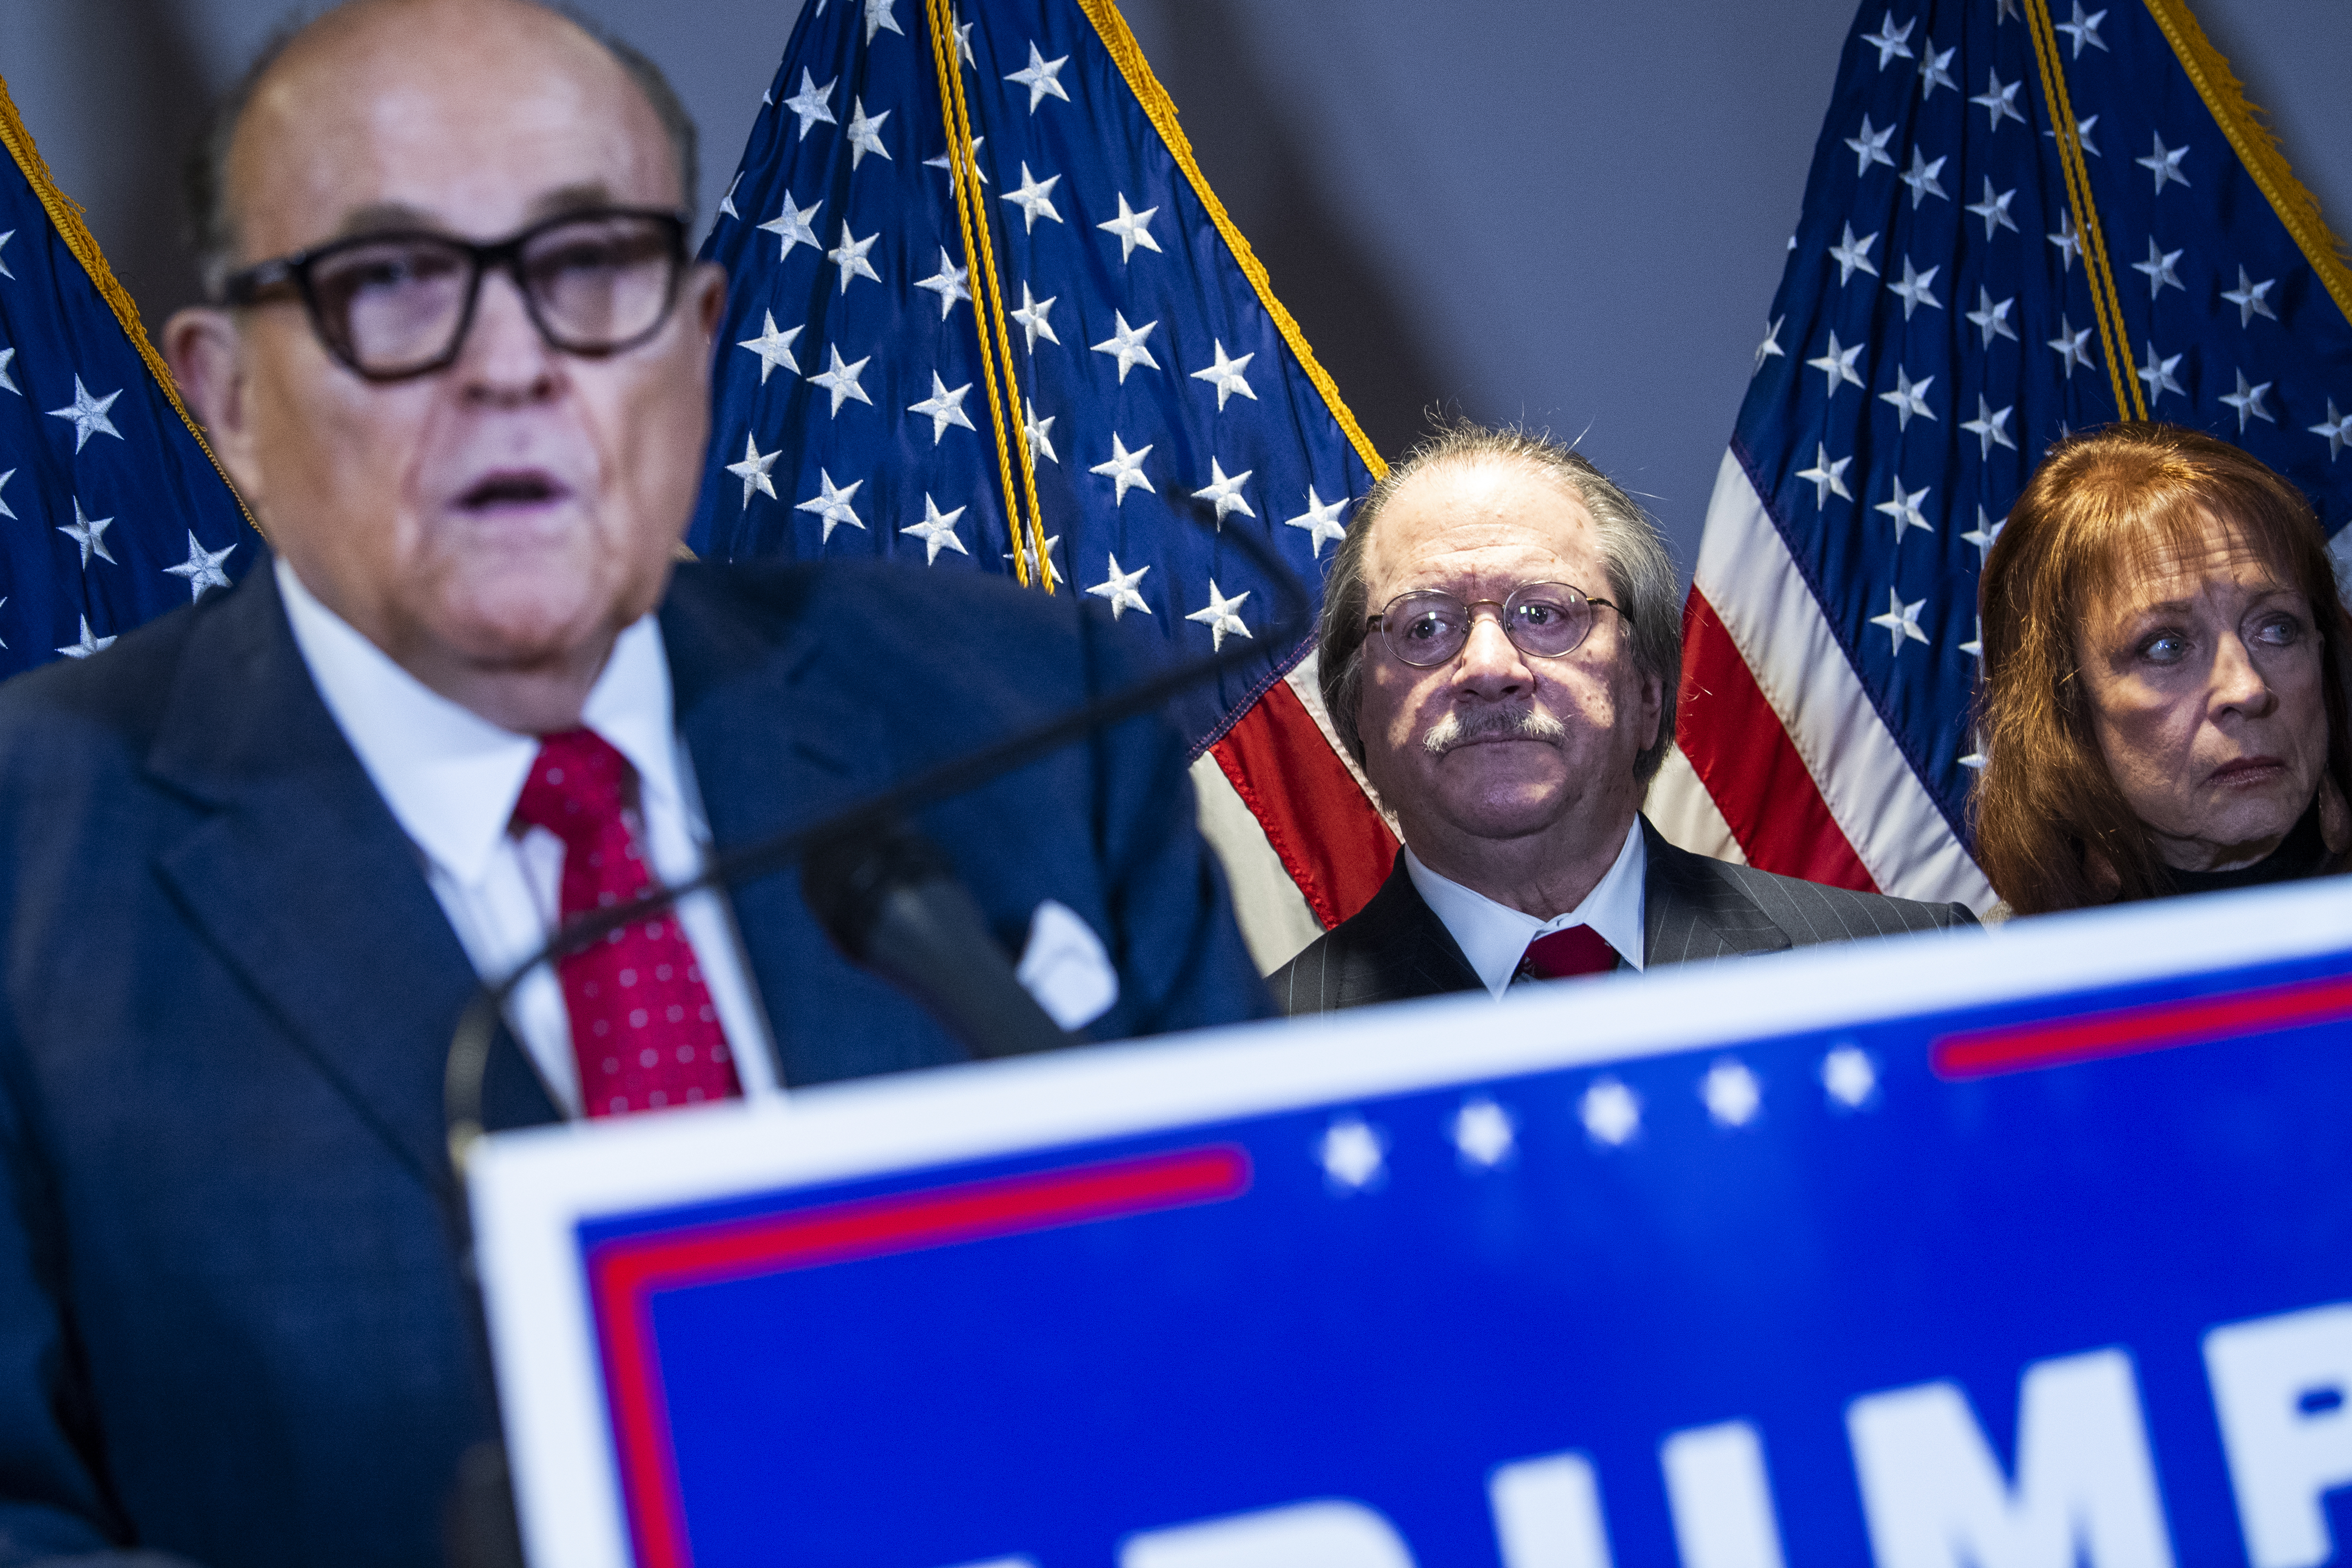 UNITED STATES - NOVEMBER 19: Rudolph Giuliani, left, and Joseph diGenova, center, attorneys for President Donald Trump, conduct a news conference at the Republican National Committee on lawsuits regarding the outcome of the 2020 presidential election on Thursday, November 19, 2020. (Photo By Tom Williams/CQ Roll Call)